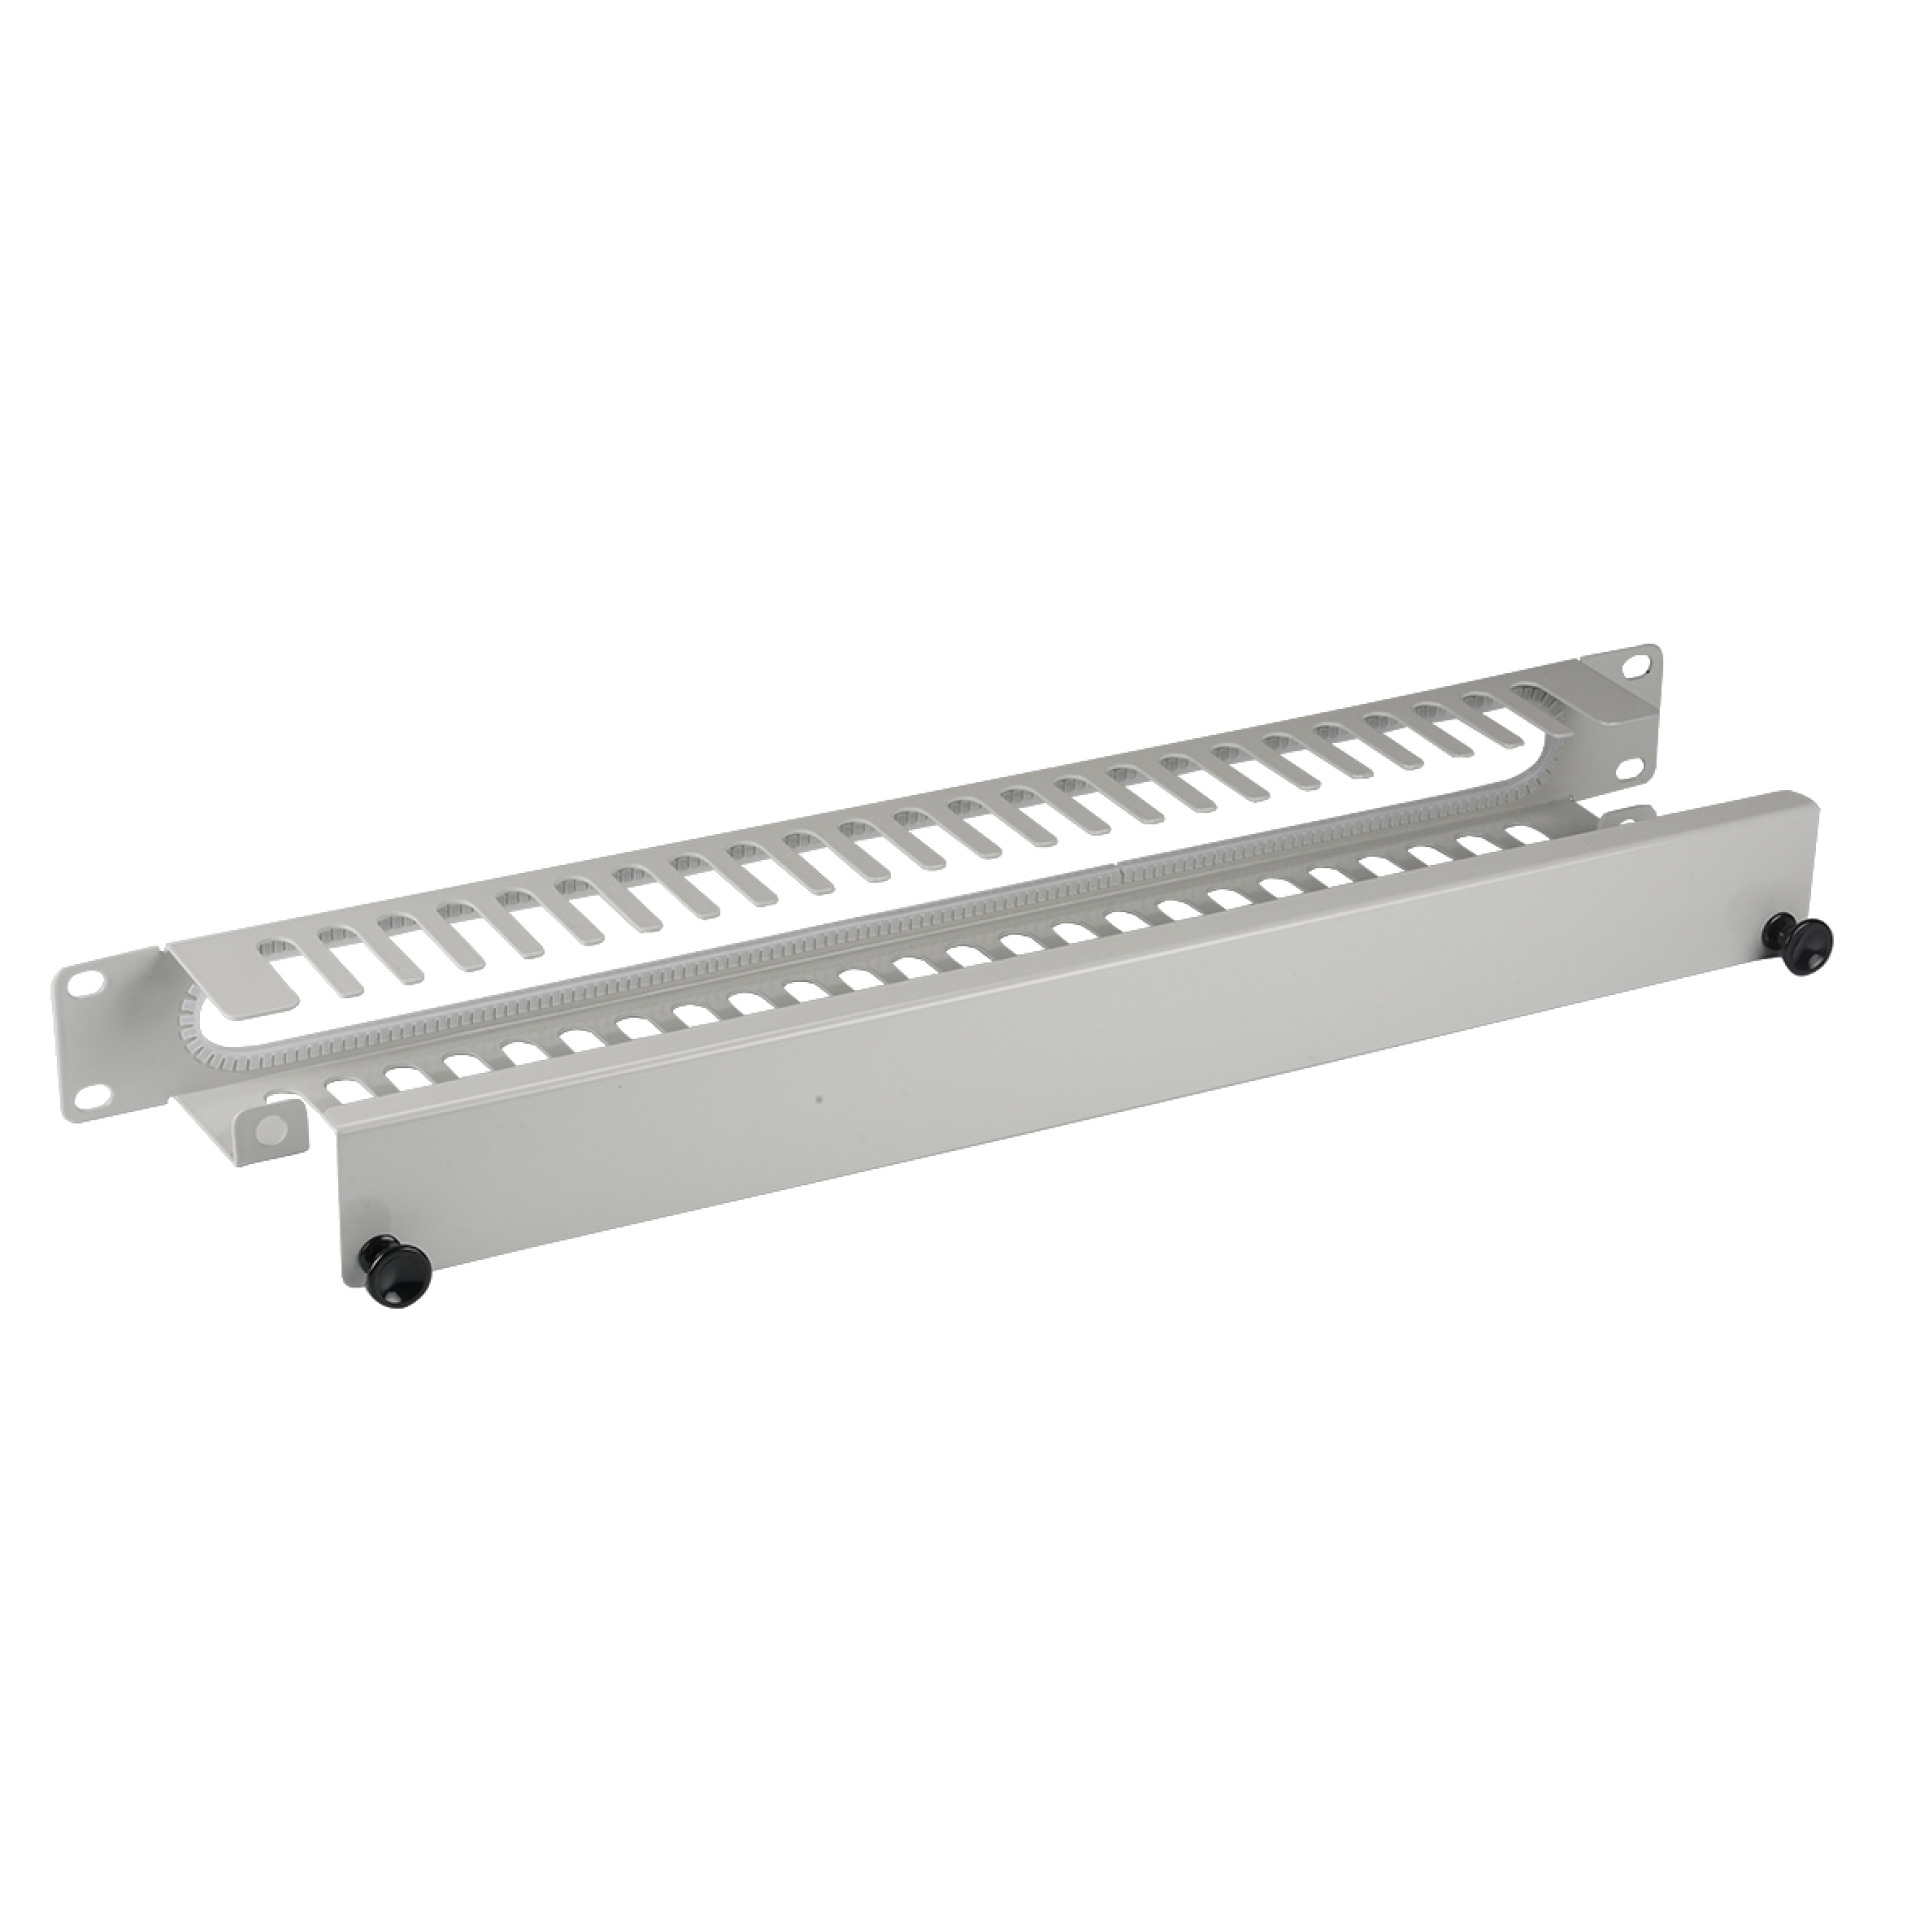 19" 1U Cable Routing Panel with Cover, RAL9005